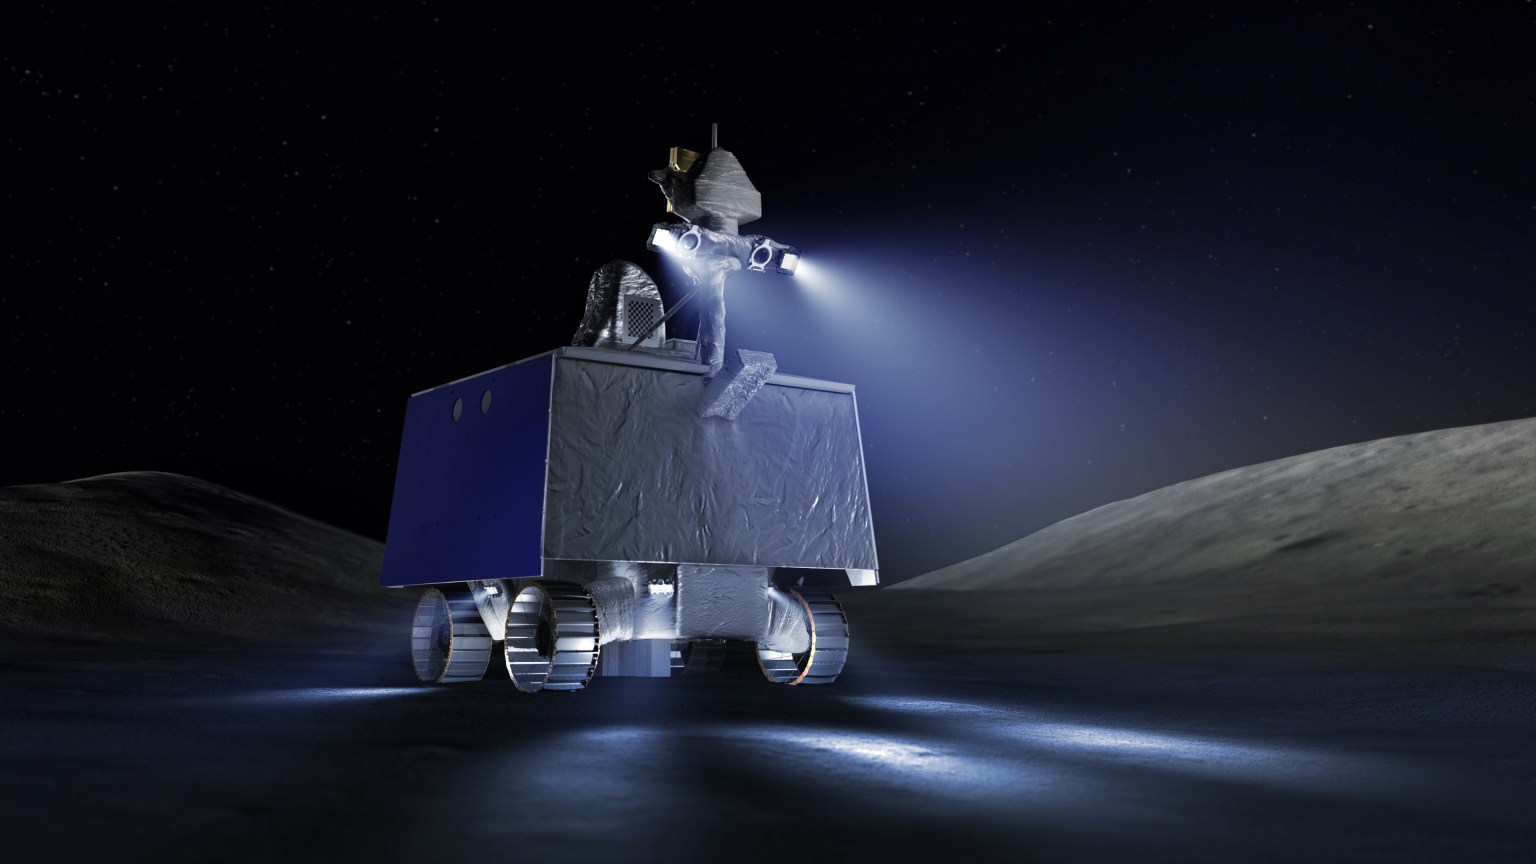 A box-shaped rover with four wheels on the surface of the Moon, with lights illuminating the path before it.